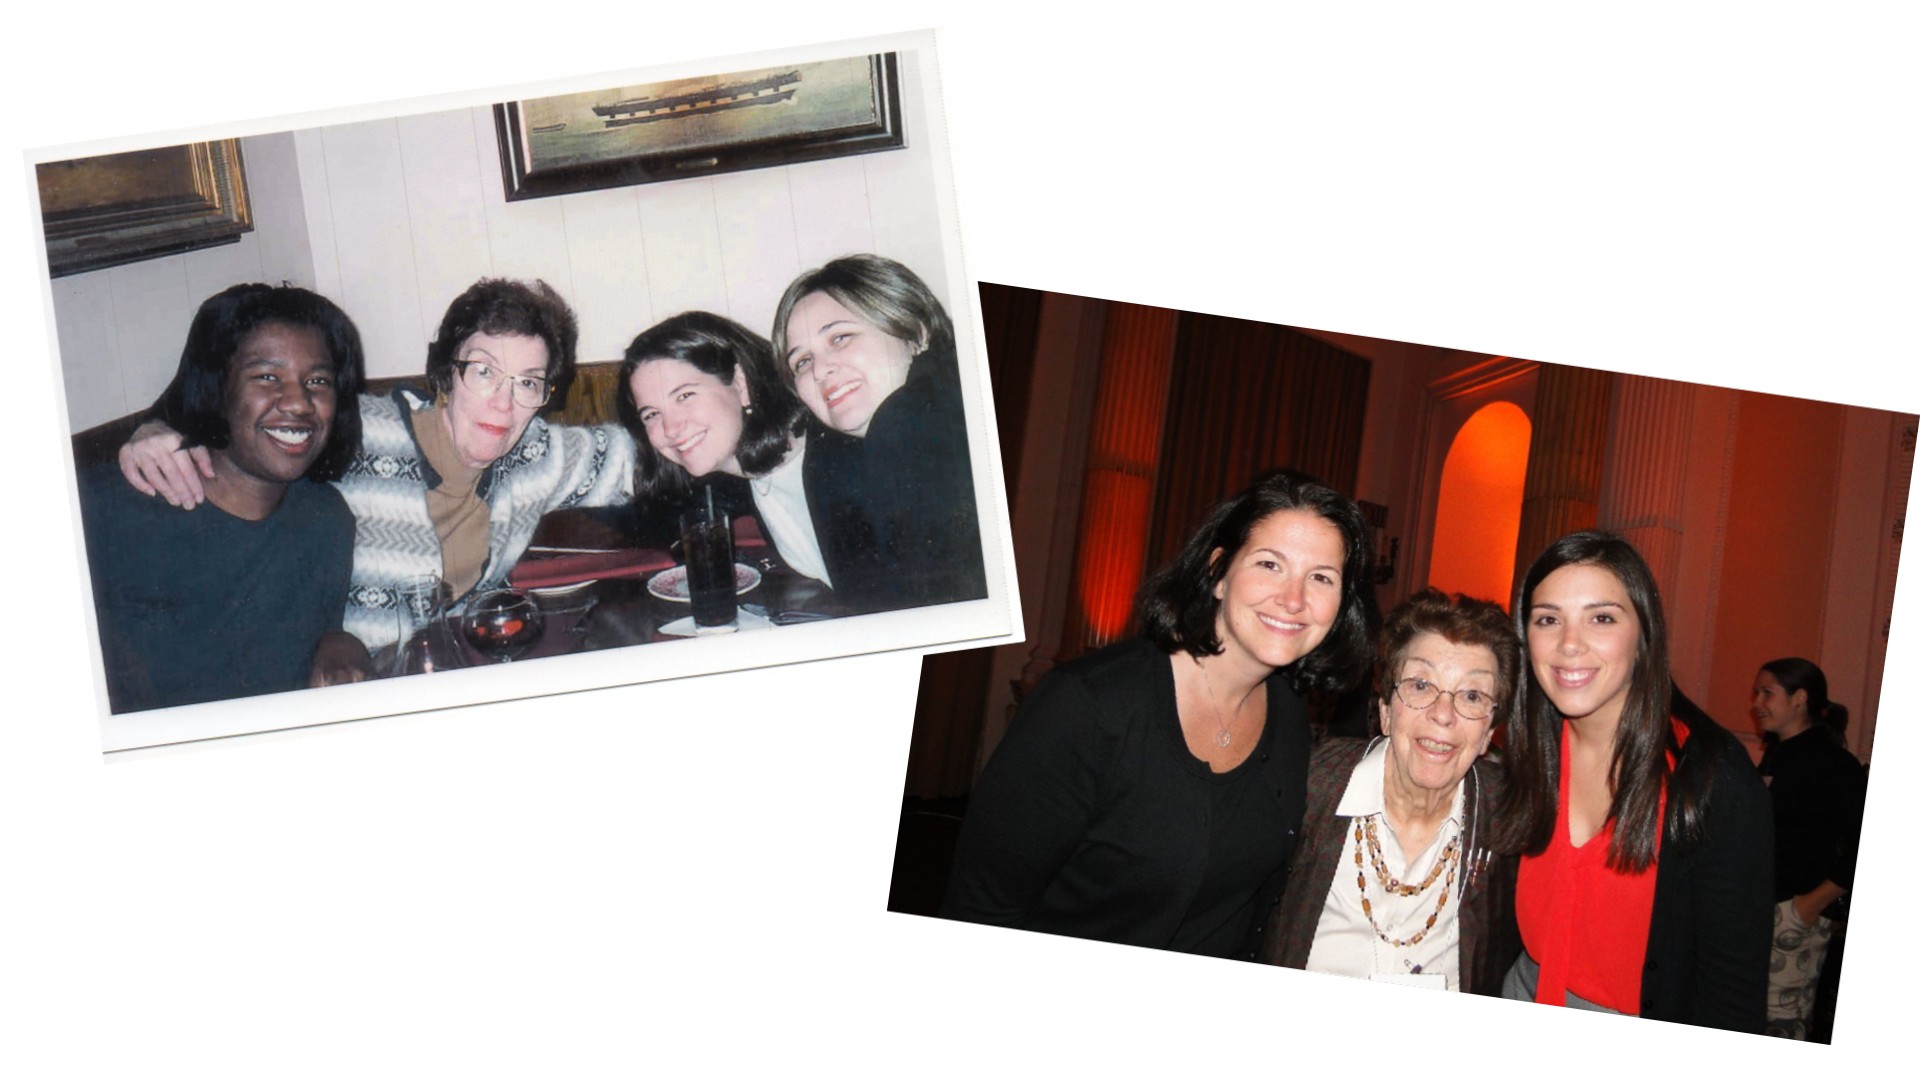 Top left: The Original Brodey Bunch, L - R: Dana Prophet, Dr. Jean Brodey, Cathy Menendez, and Danielle Cohn at the Whitemarsh Valley Inn ca. 1995.
Bottom right: L - R: Cathy Menendez, Dr. Jean Brodey, Rachel Santella Gormley, recipient of the Philadelphia Public Relations Association's Dr. Jean Brodey Student Achievement Award 2011.
